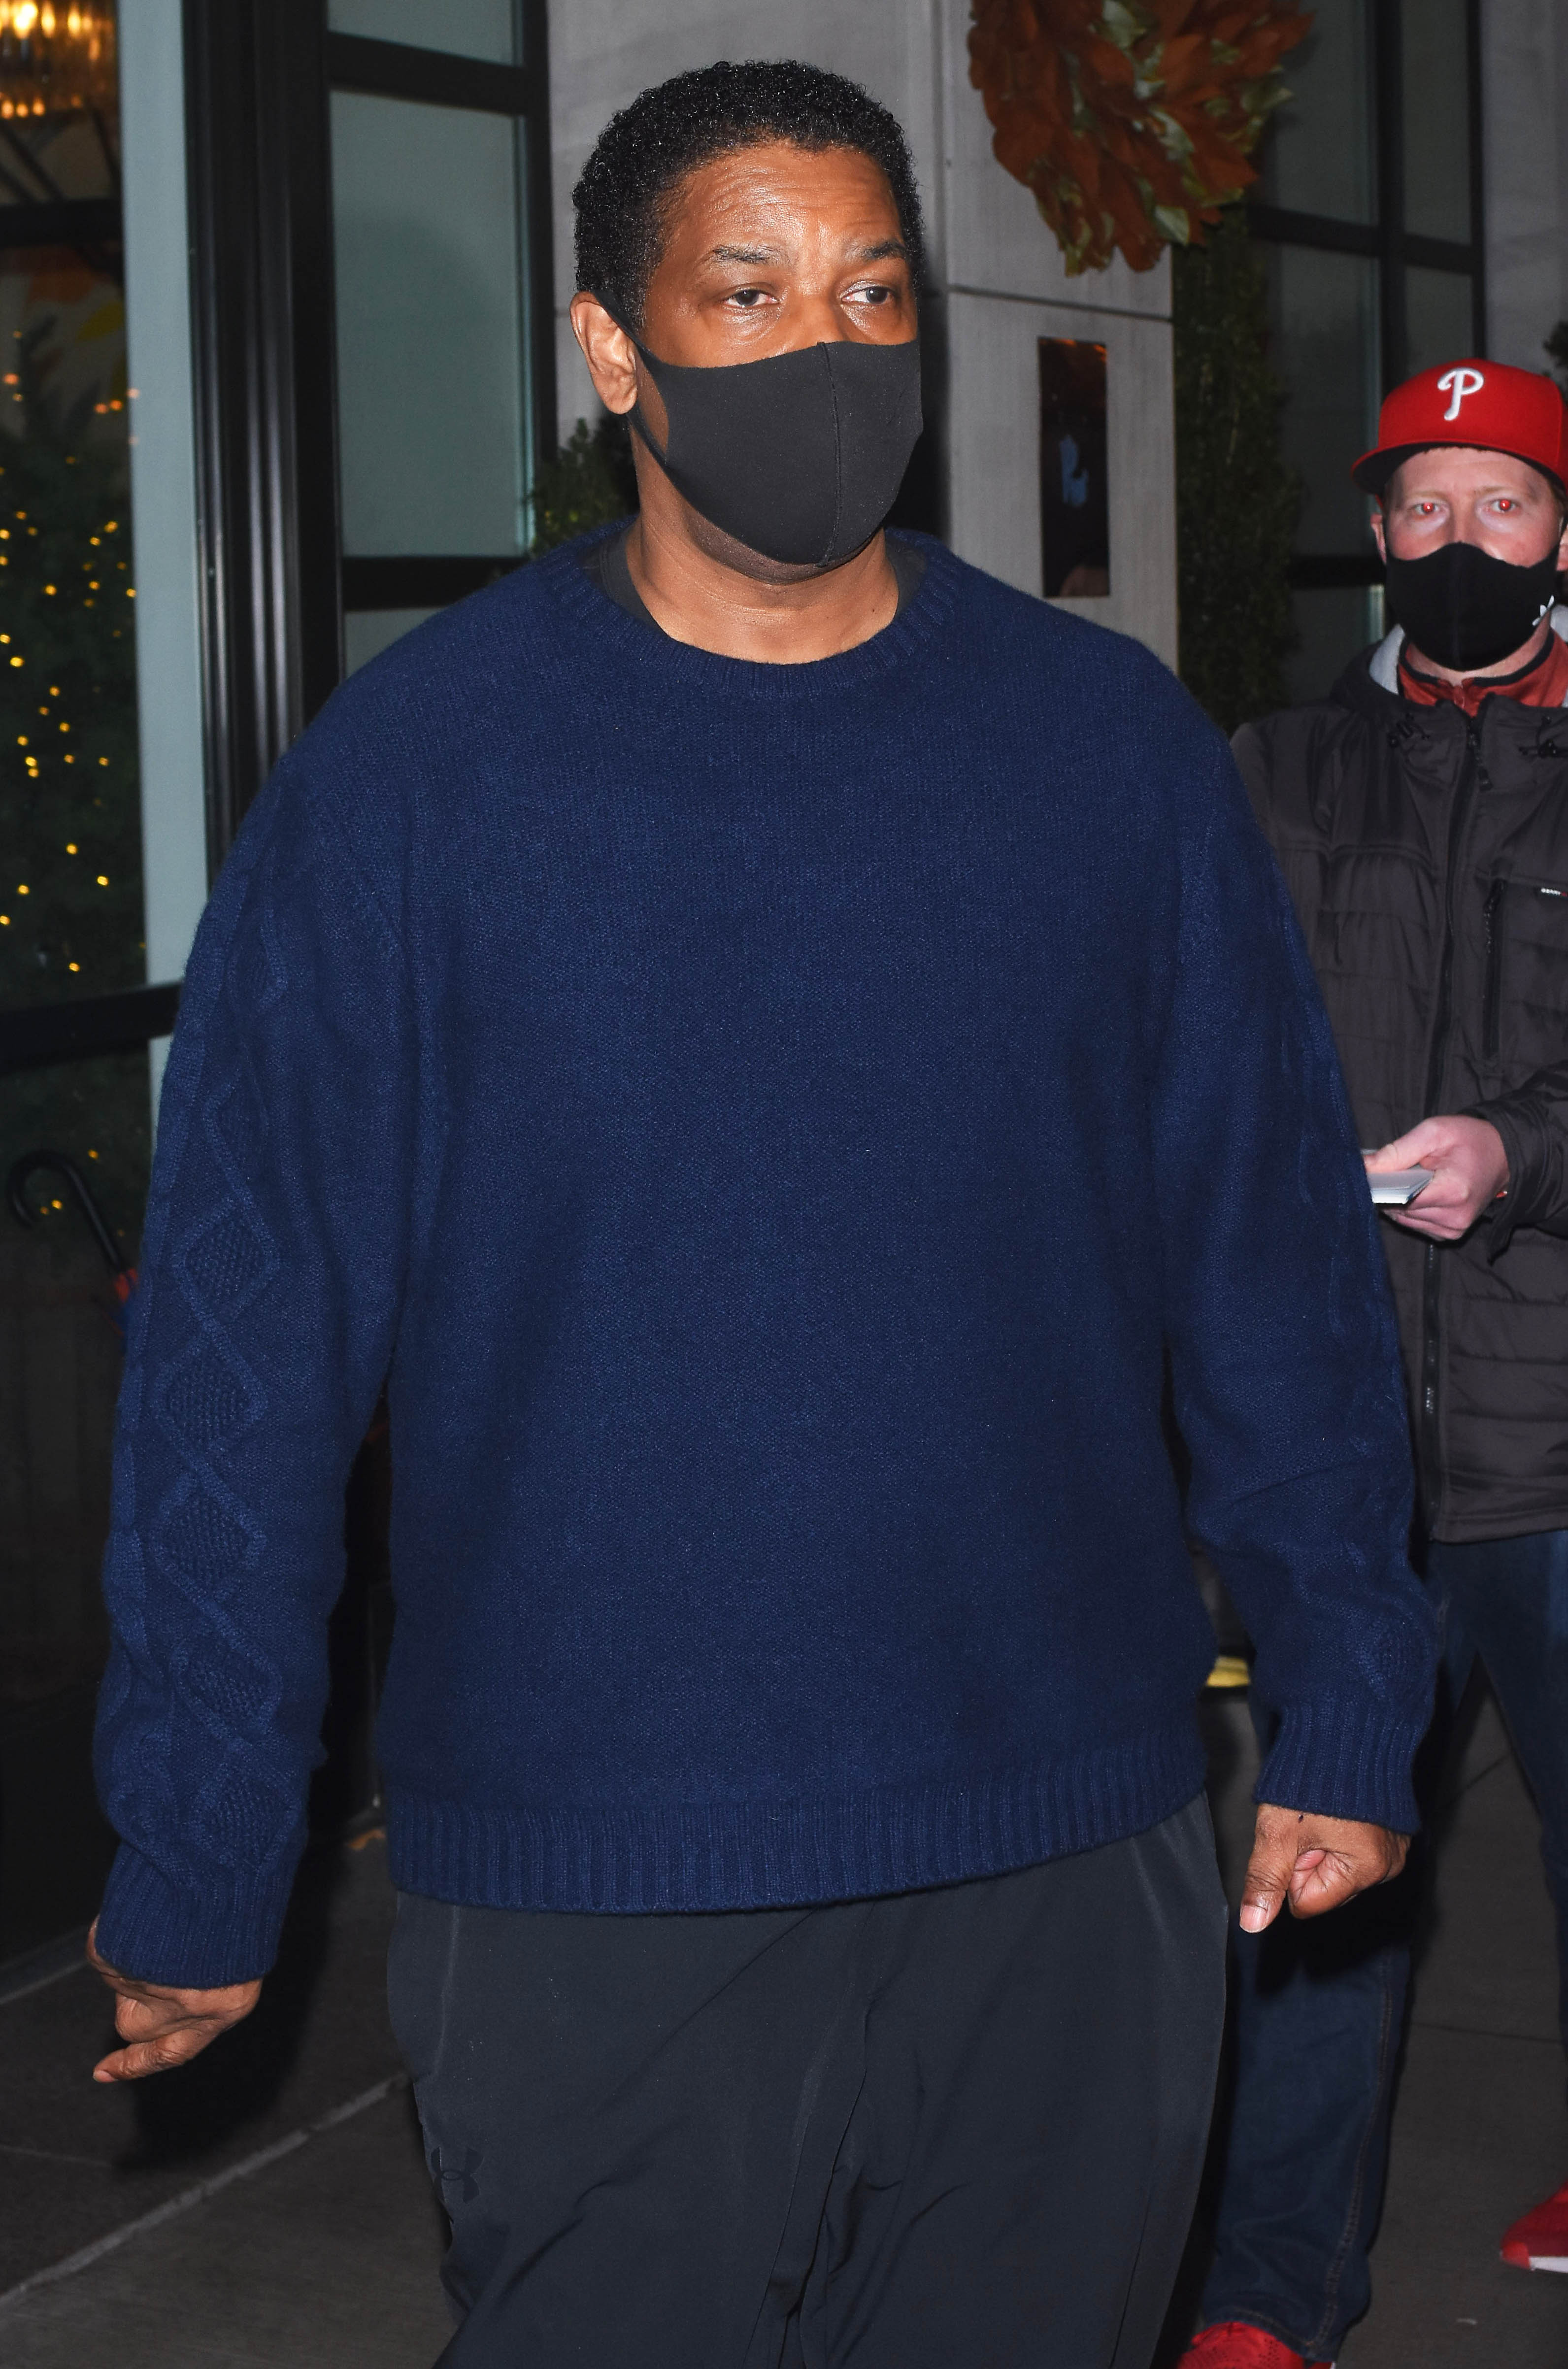 Denzel Washington is seen on December 10, 2021, in New York City. | Source: Getty Images